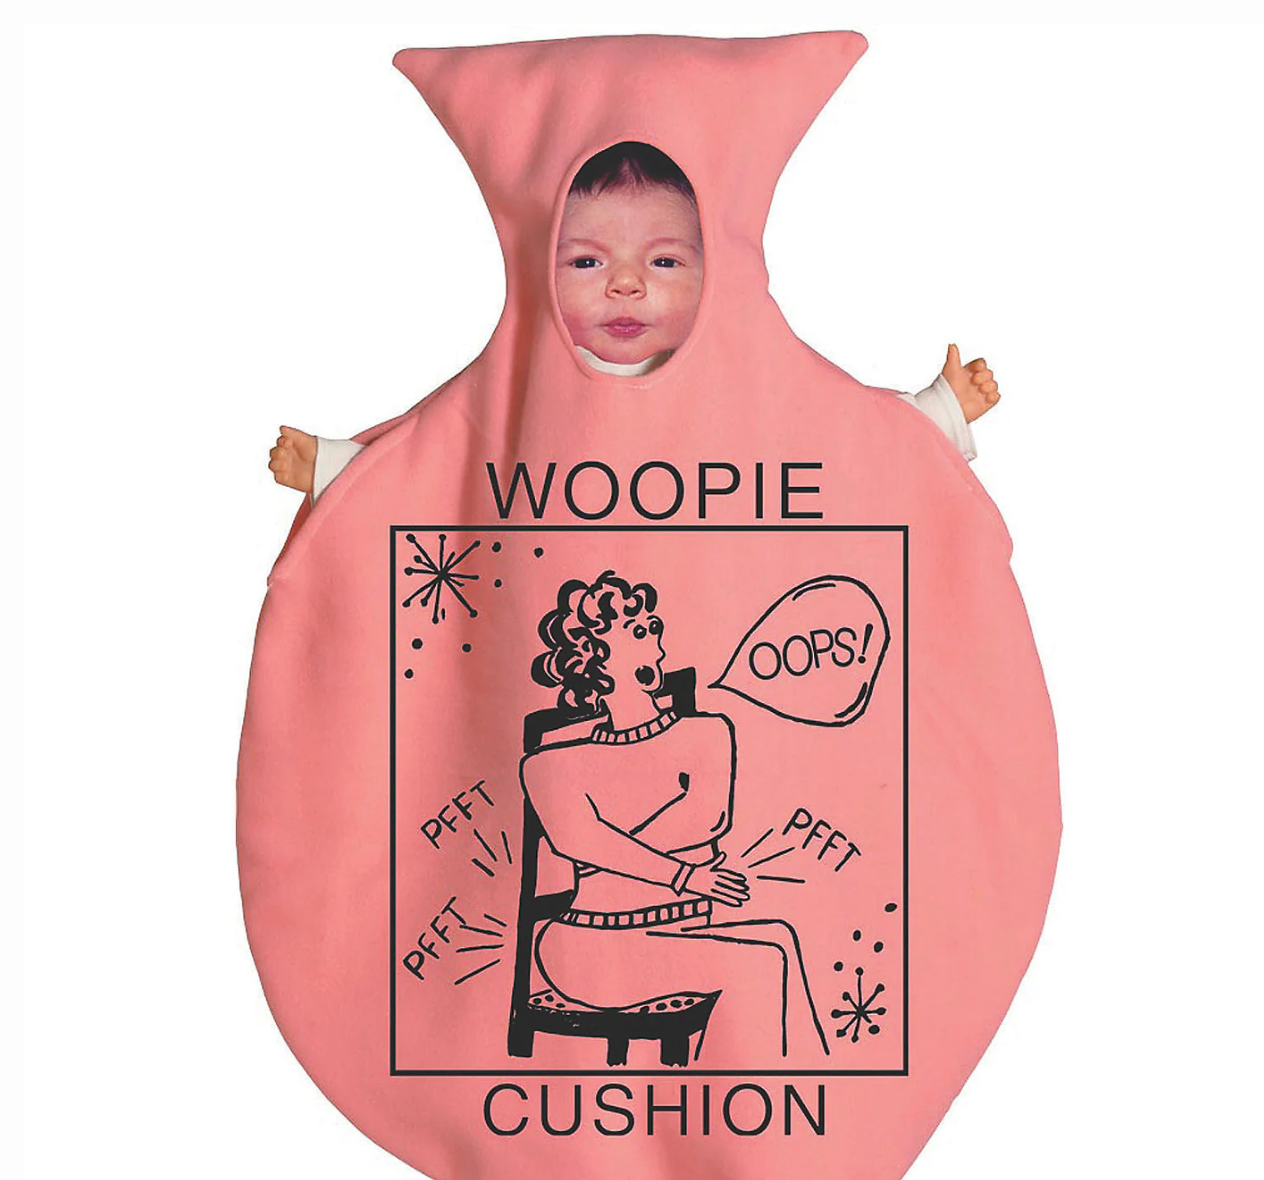 Baby Whoopie Cushion Bunting Costume - Little Bundle of Laughs! 🎈👶